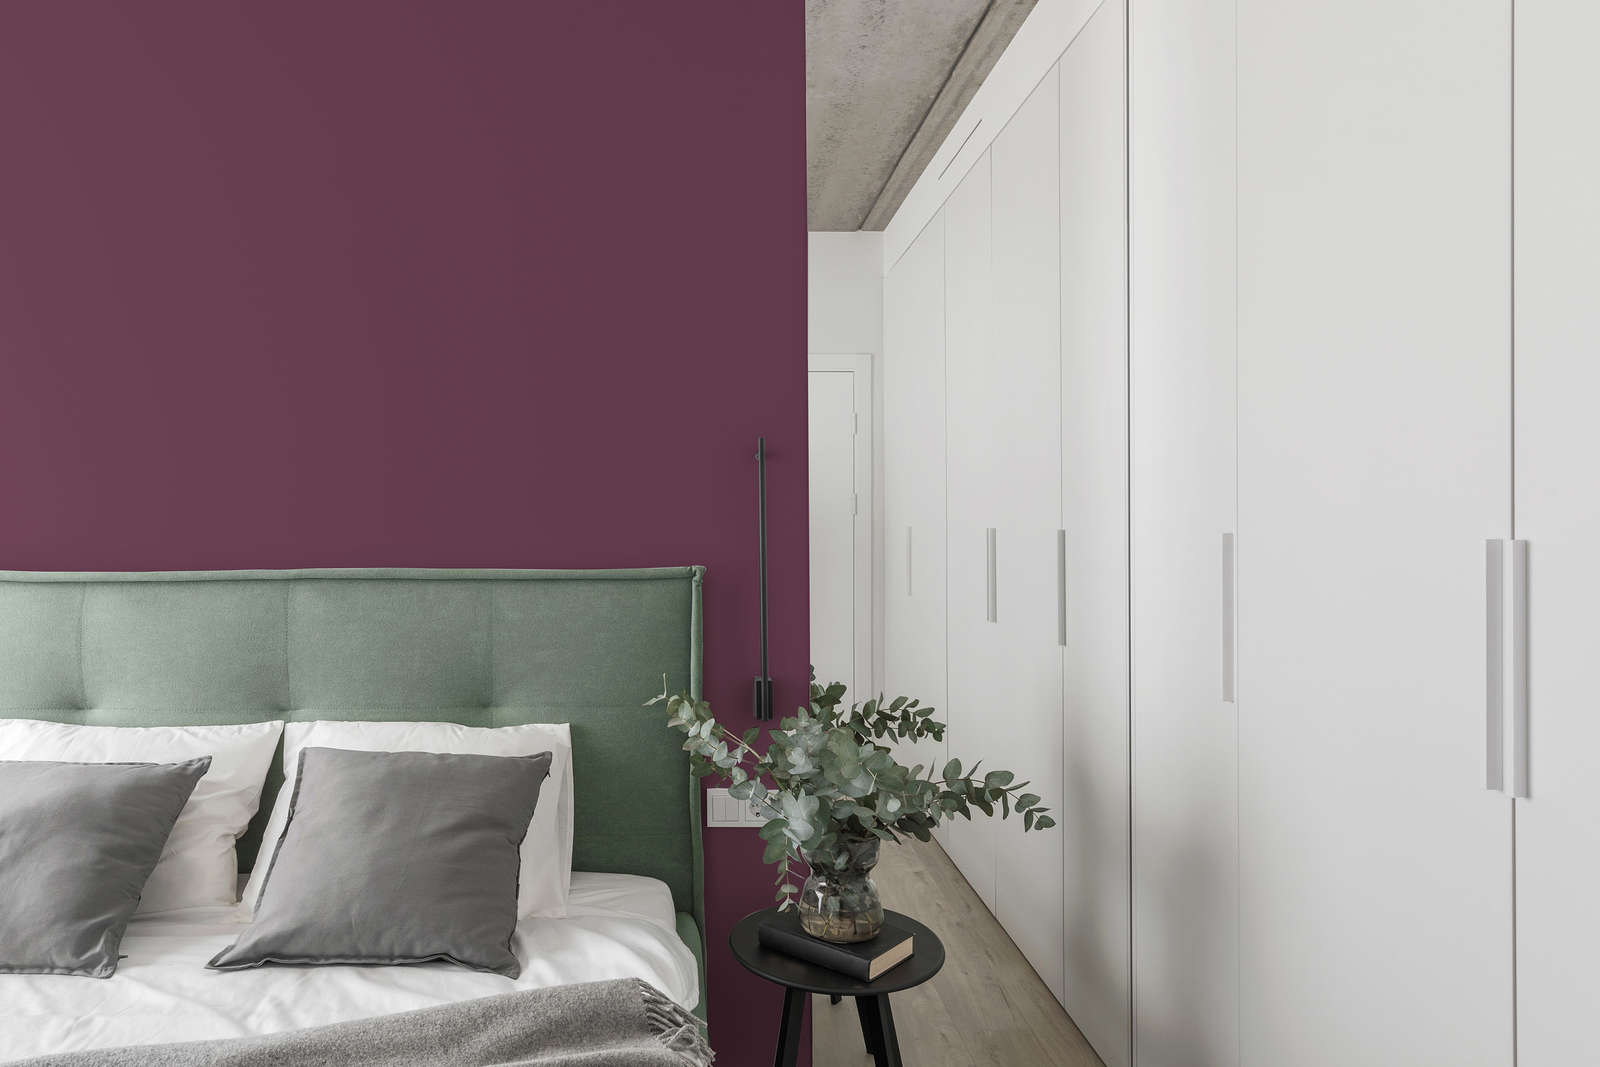             Premium Wall Paint strong berry »Beautiful Berry« NW212 – 2.5 litre
        